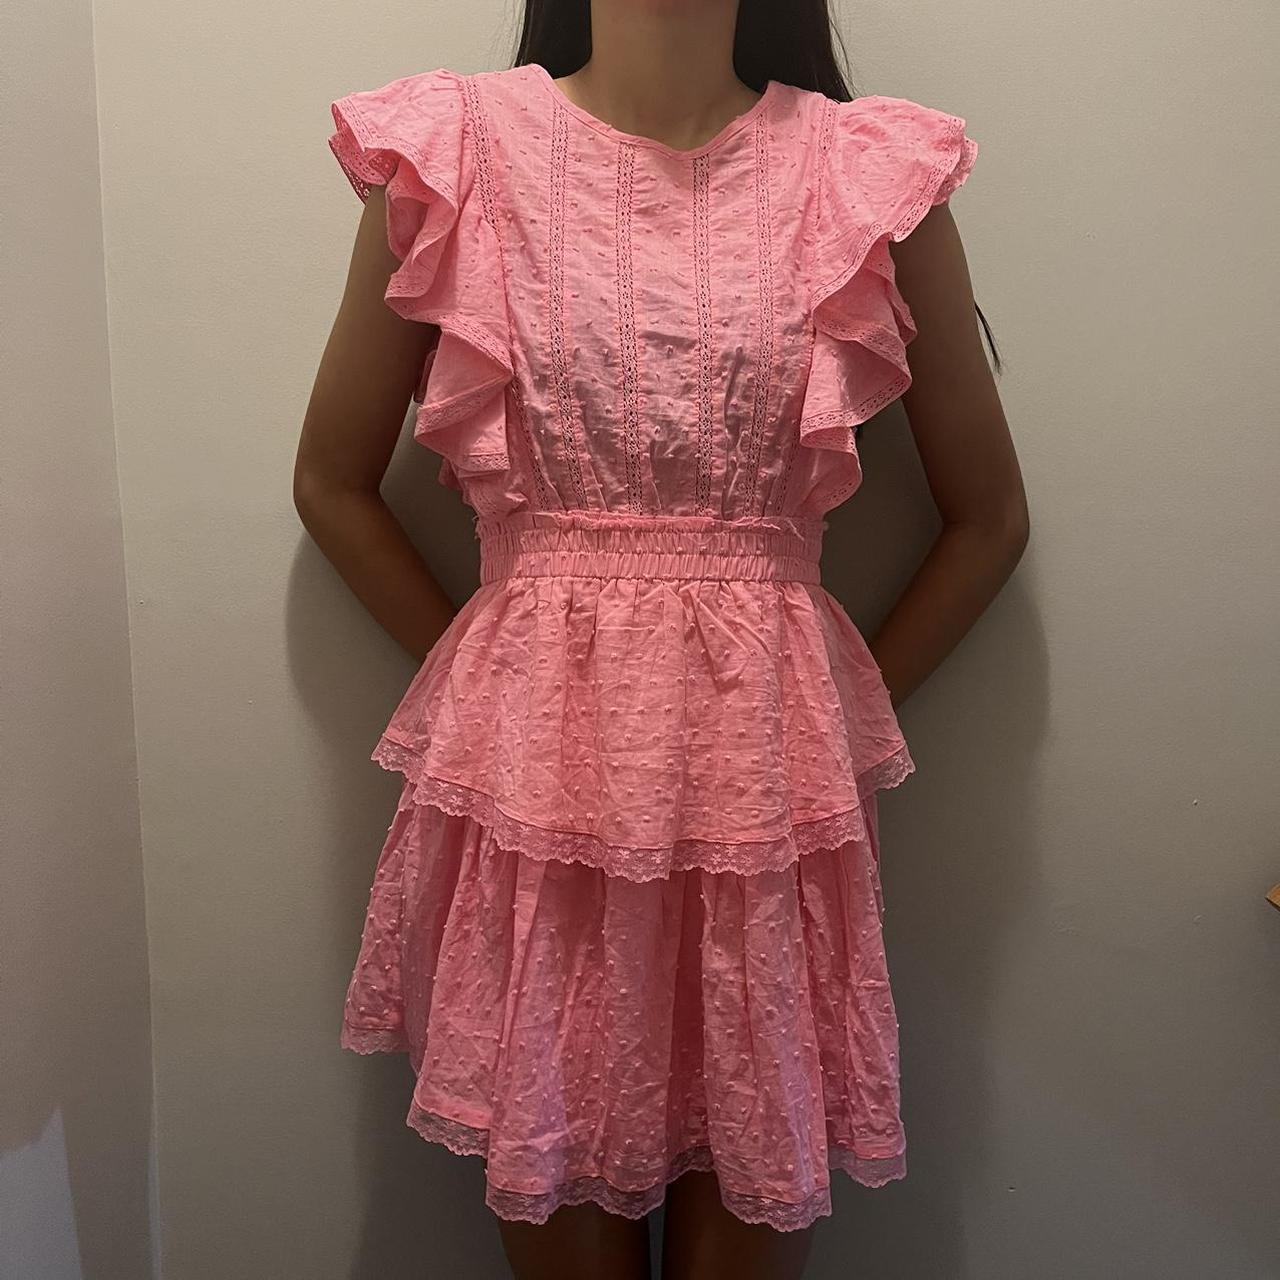 ruffled preppy pink dress ♡ from Forever 21 ♡ size... - Depop